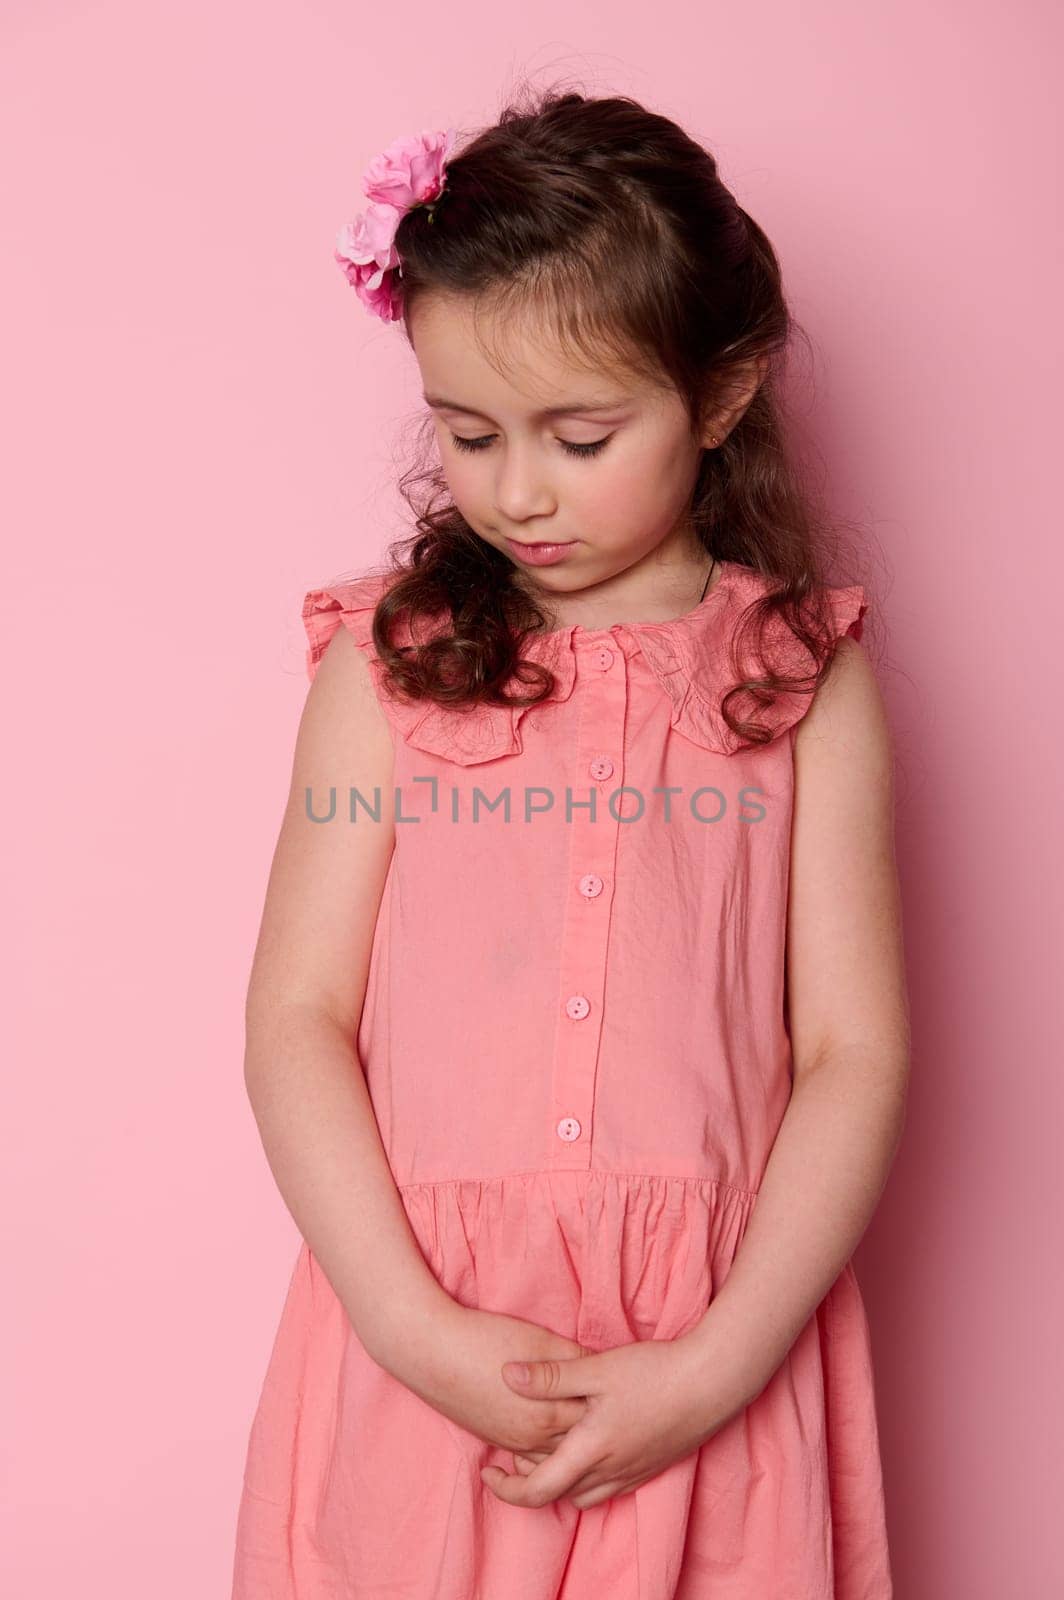 Beautiful coquette, shy child, adorable little girl 5-6 years old, standing over pink isolated background. Happy carefree childhood concept. Portrait of a preschooler child. Kids fashions and beauty